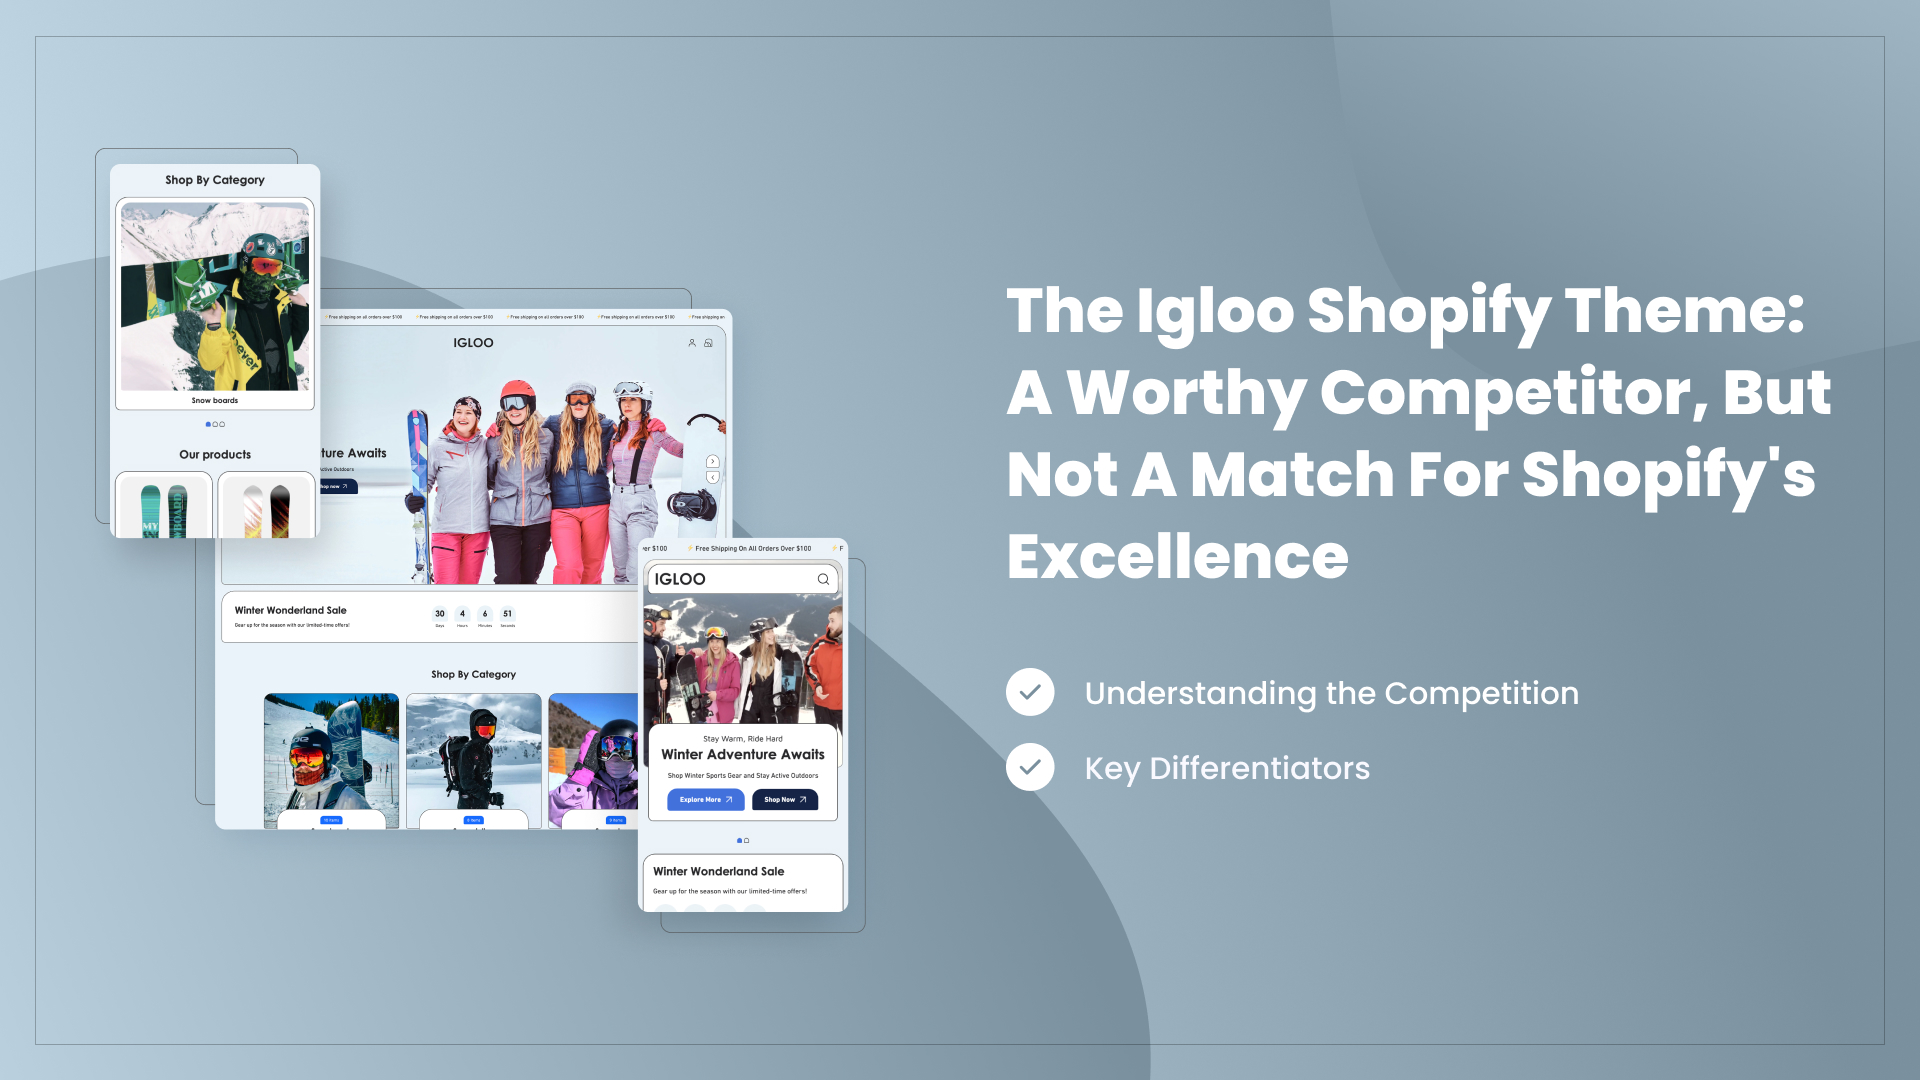 The Igloo Shopify Theme: A Worthy Competitor, But Not a Match for Shopify’s Excellence